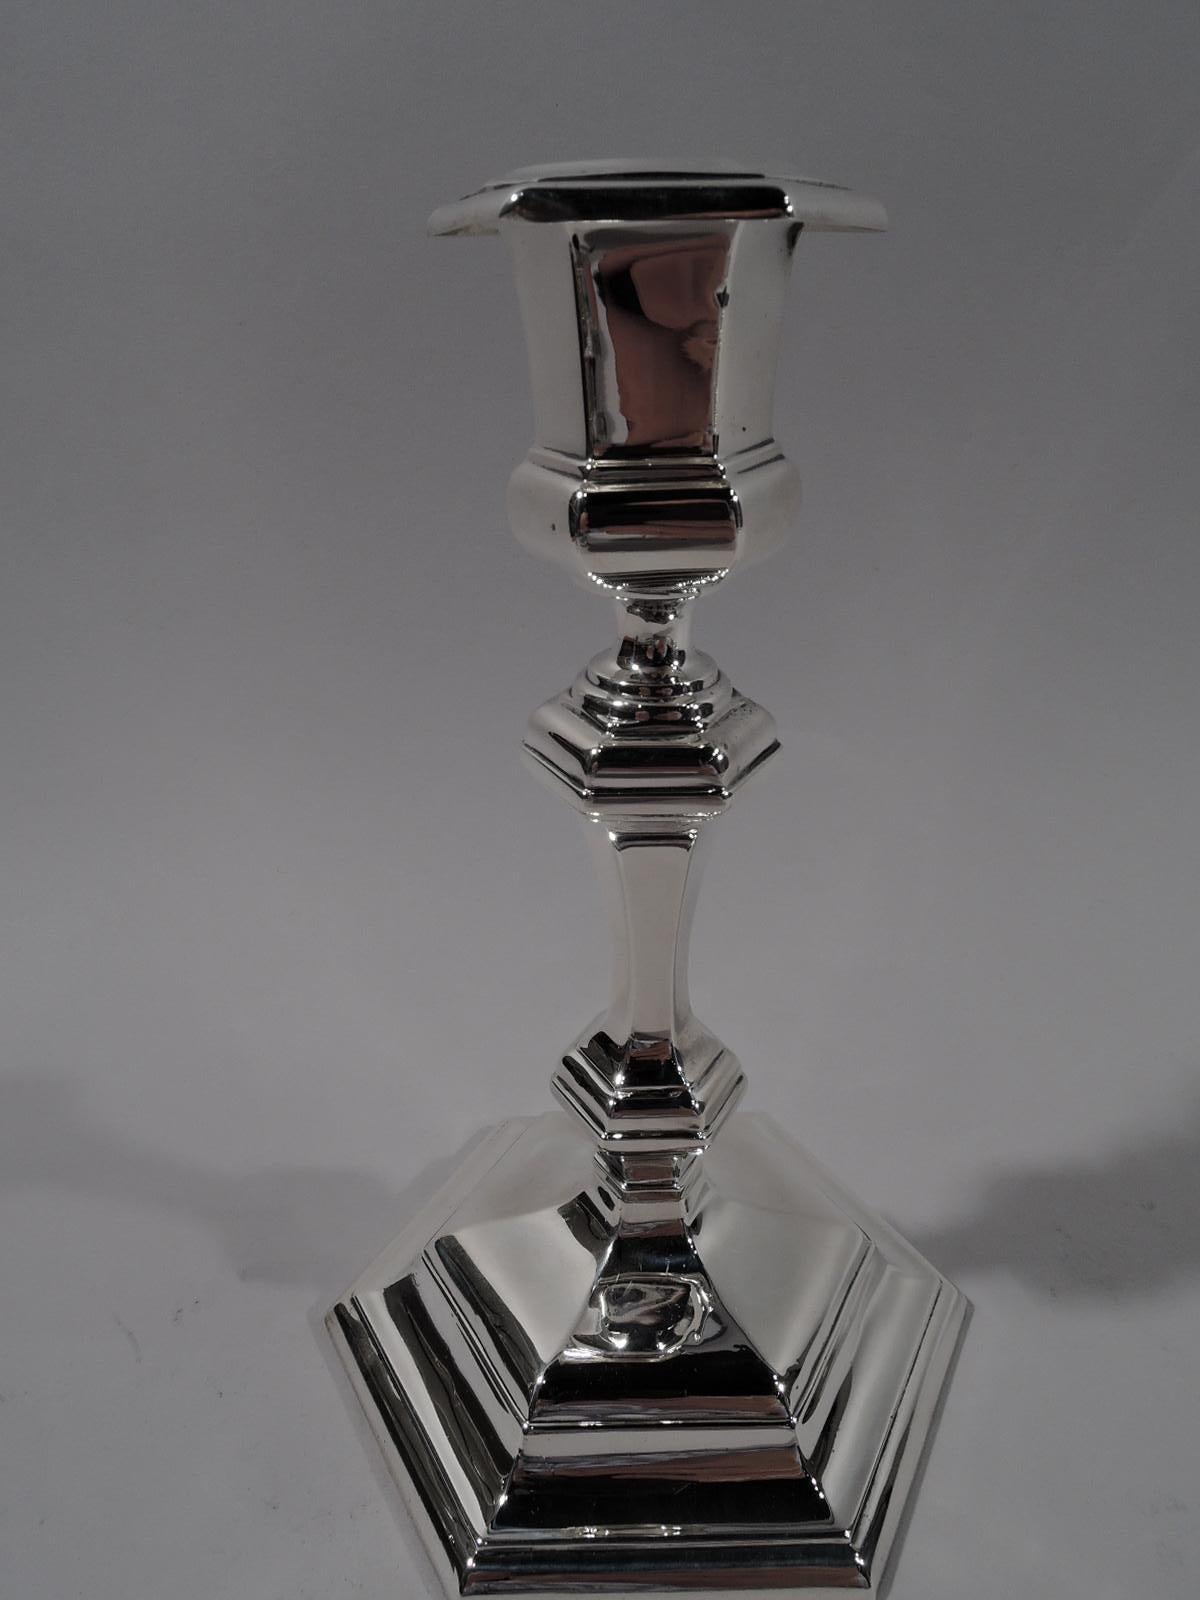 Pair of Edwardian Georgian sterling silver candlesticks. Made by Gorham in Providence in 1906-1907. Each: Bellied socket with stepped and detachable bobeche; knopped shaft and stepped foot. Faceted form works well on Modern table settings, too.